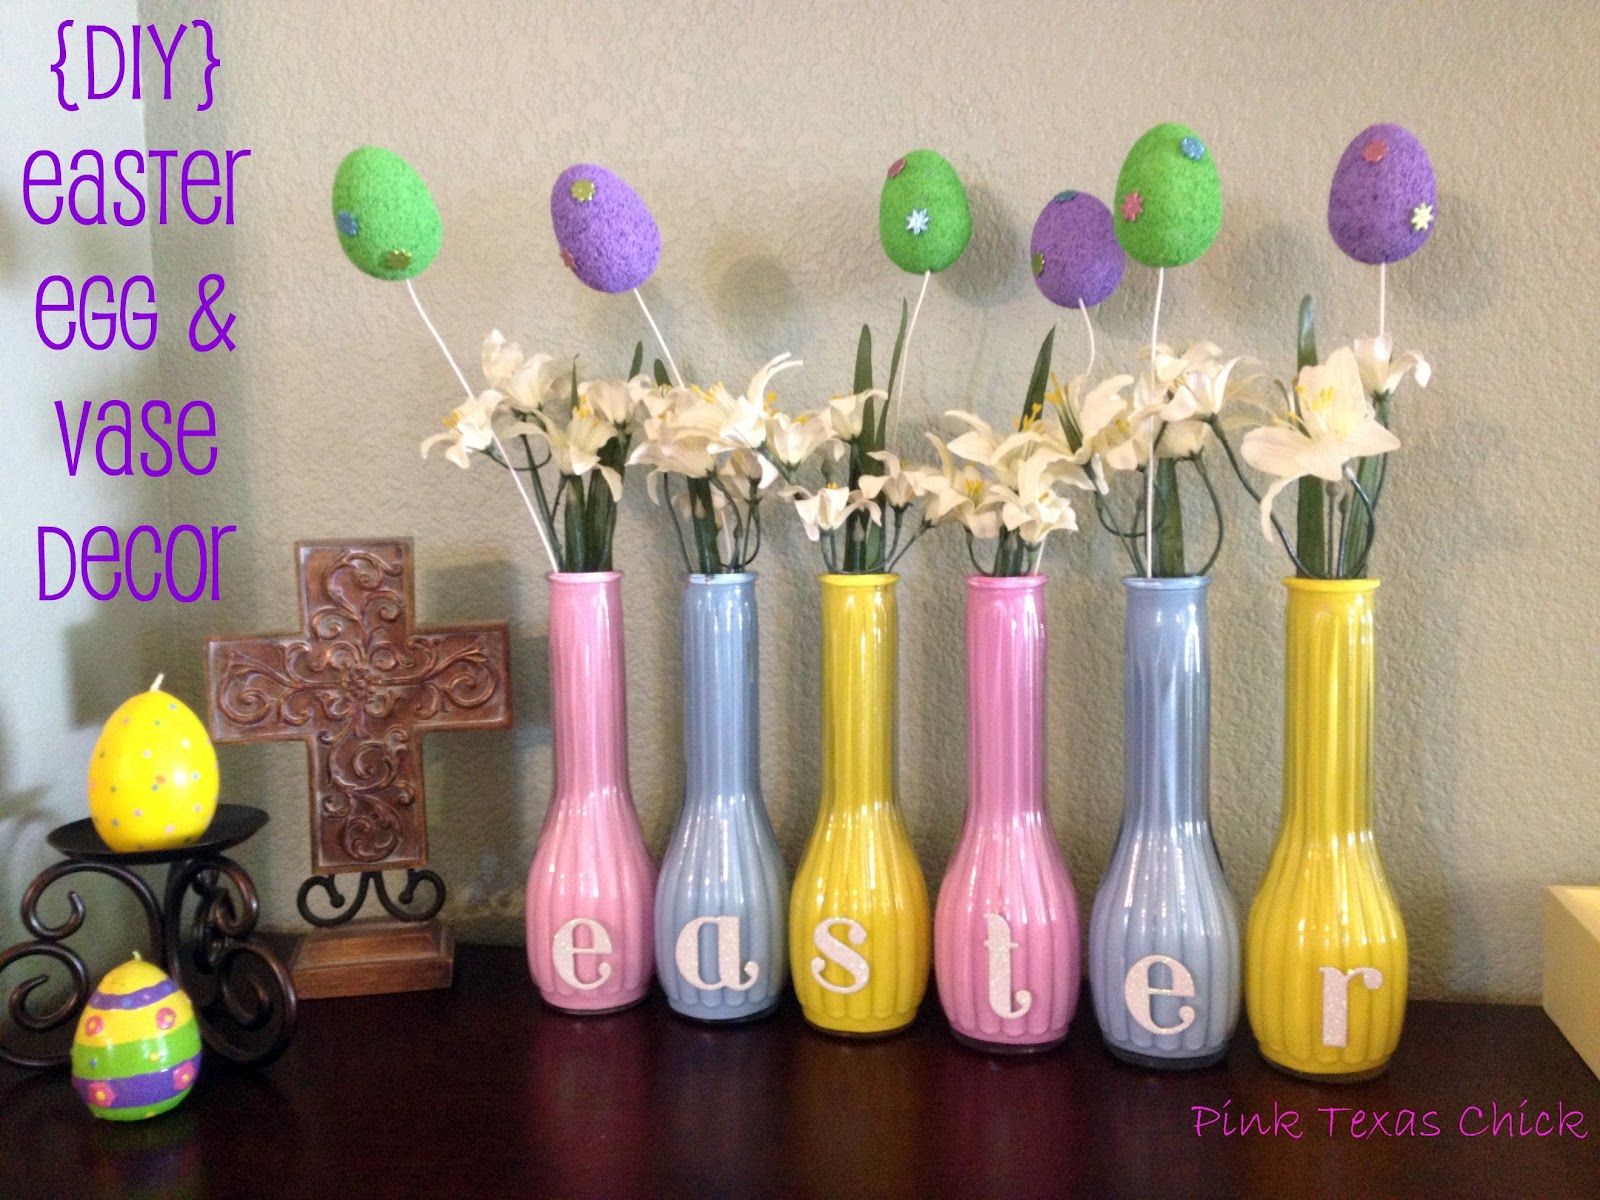 Pink Texas Chick: Easter Egg and Vase Decor {Craft DIY